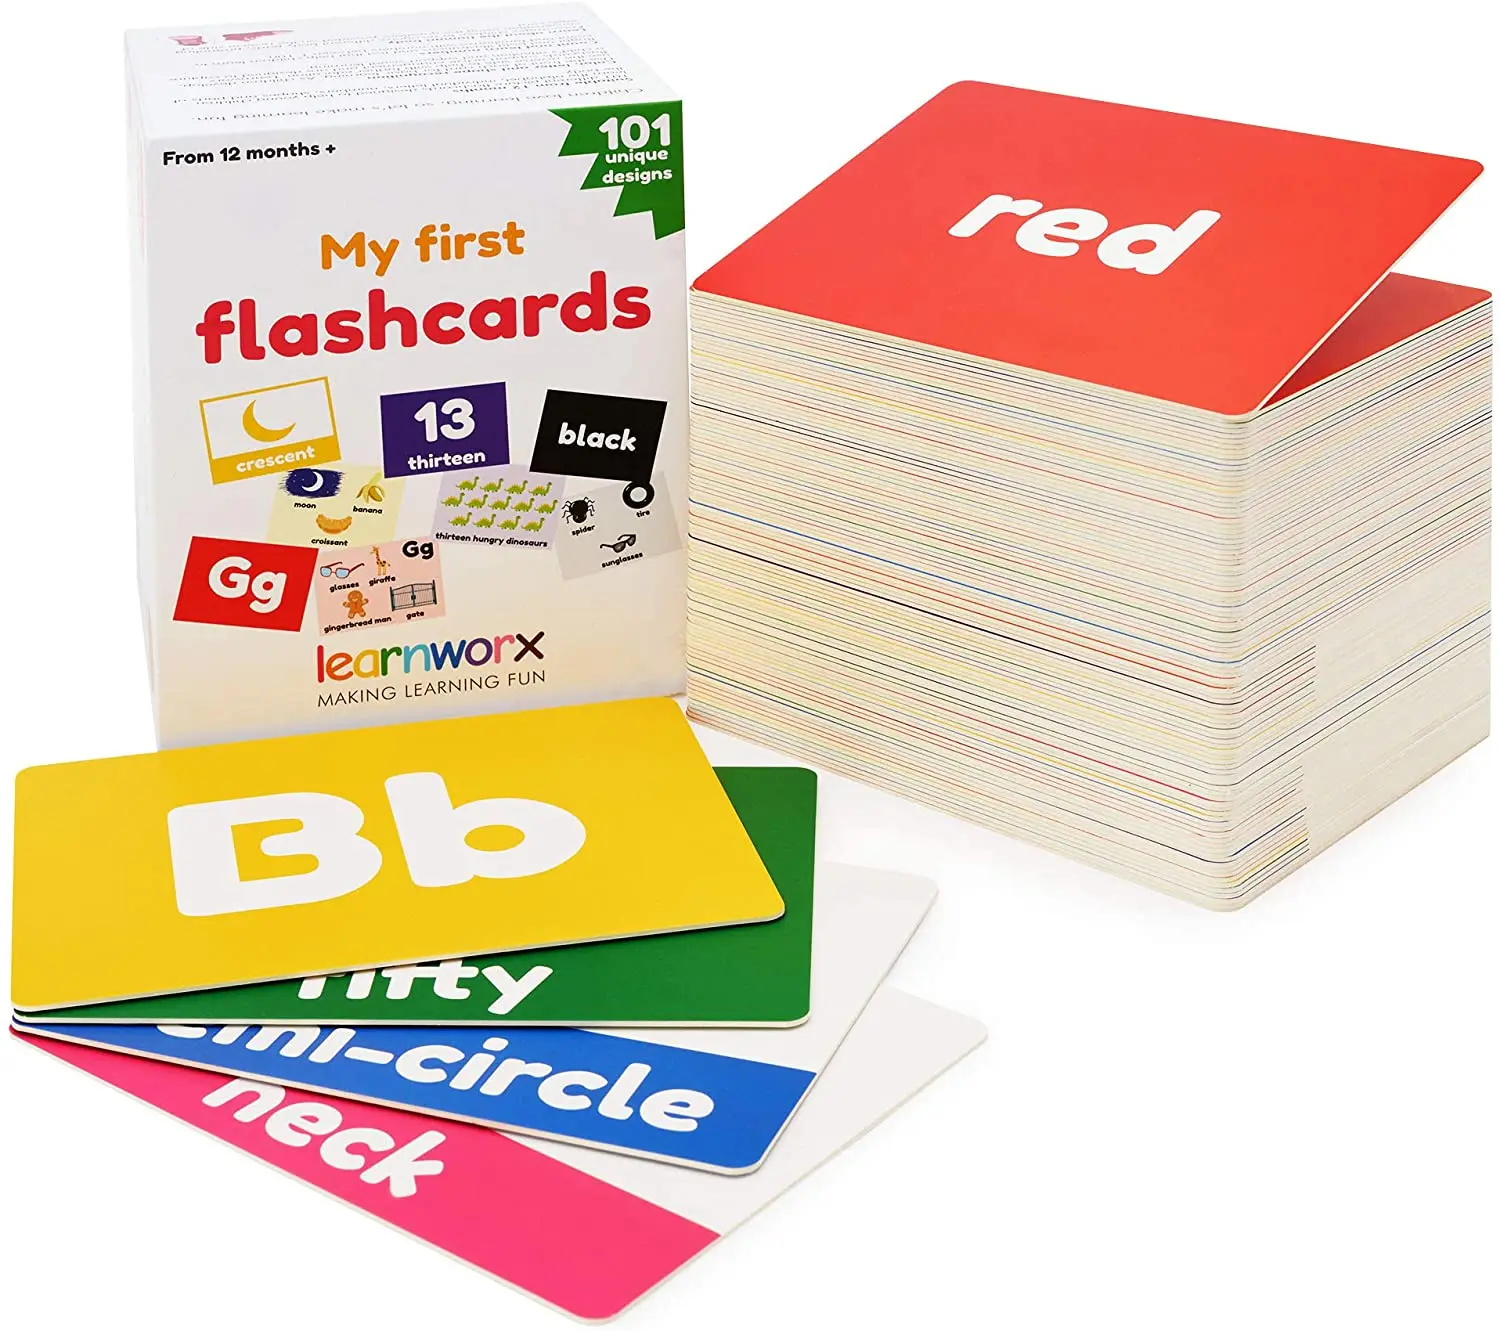 Flash 101. Flashcards first. Pack of Flashcards for Learning language Project. Pack of Flashcards for Learning language. Pack of Flashcards for Learning language Art.